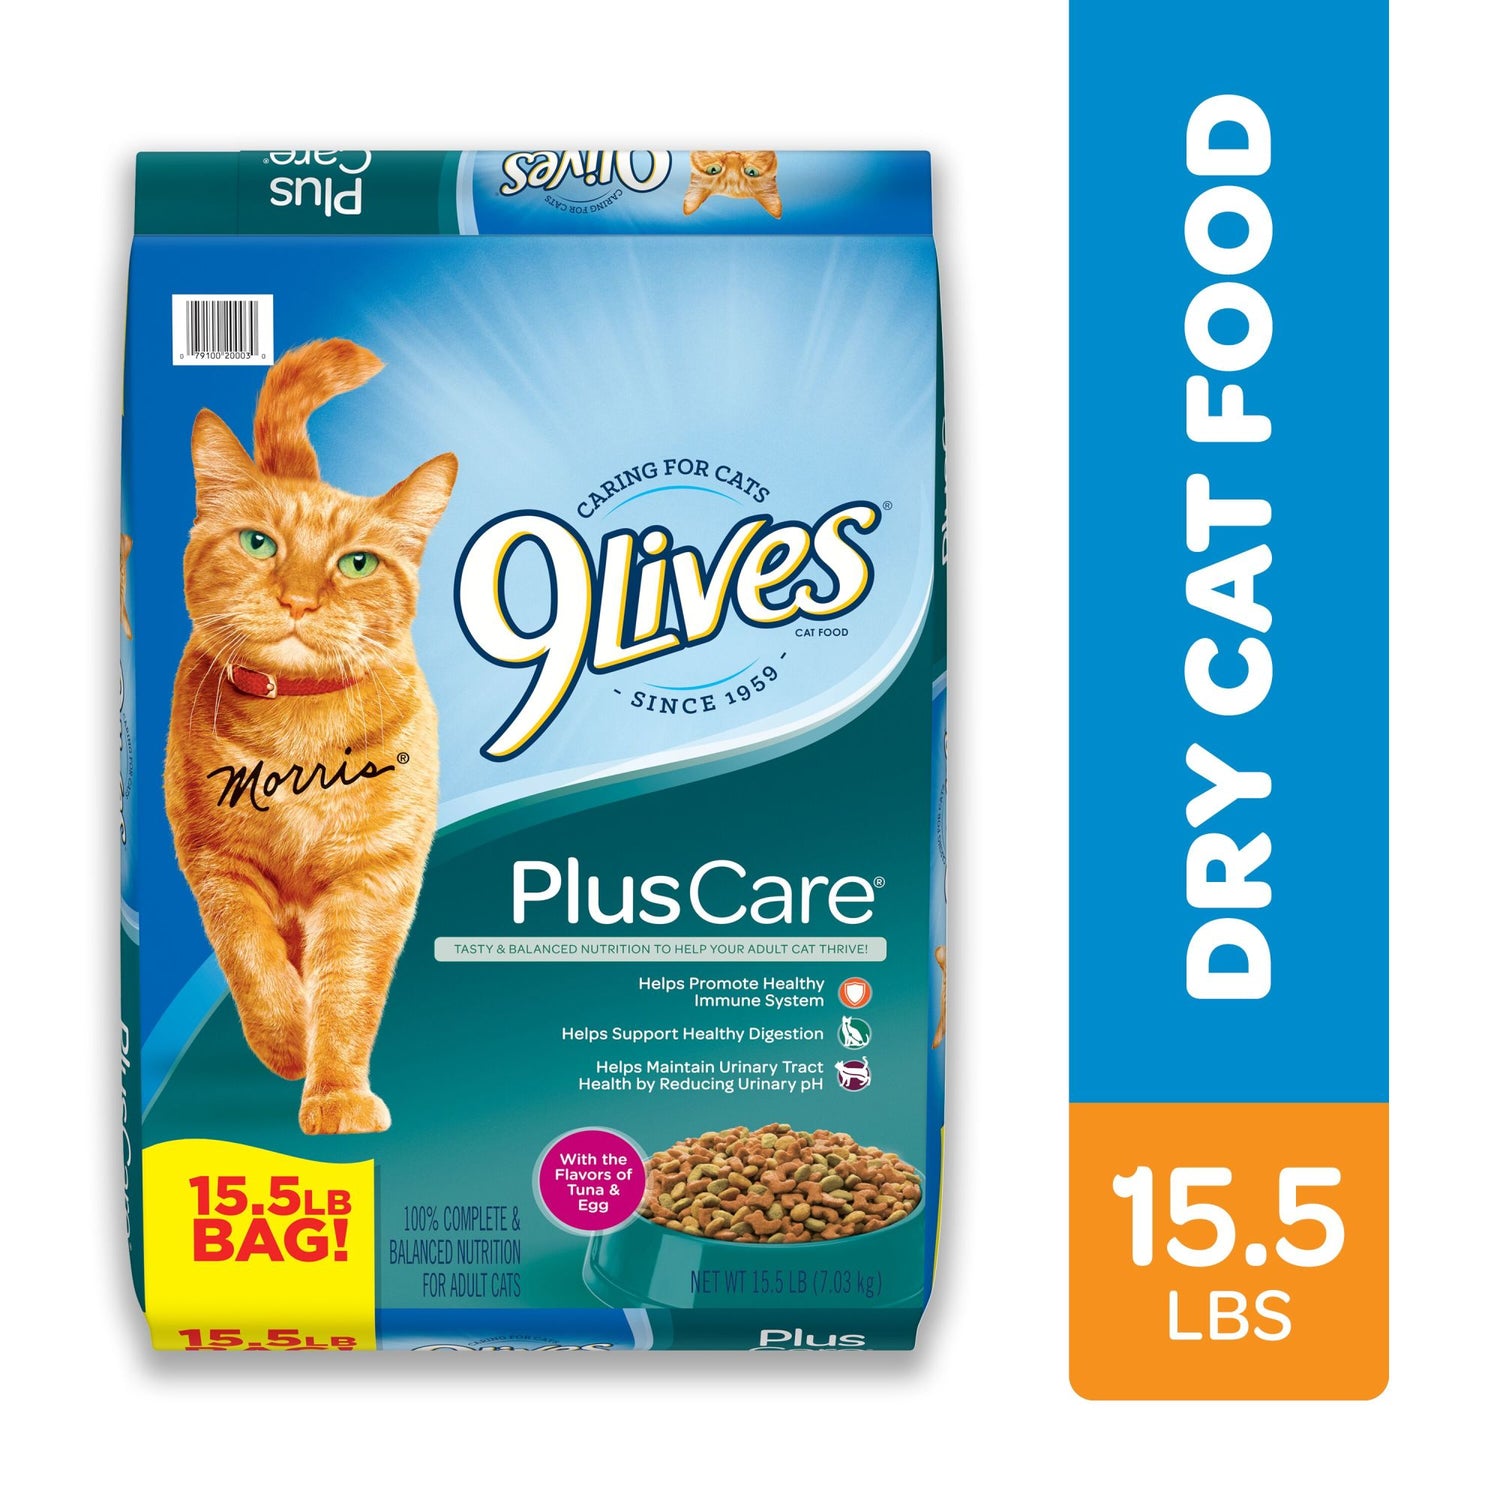 9Lives plus Care Dry Cat Food with Tuna & Egg Flavors, 15.5 Lb Bag